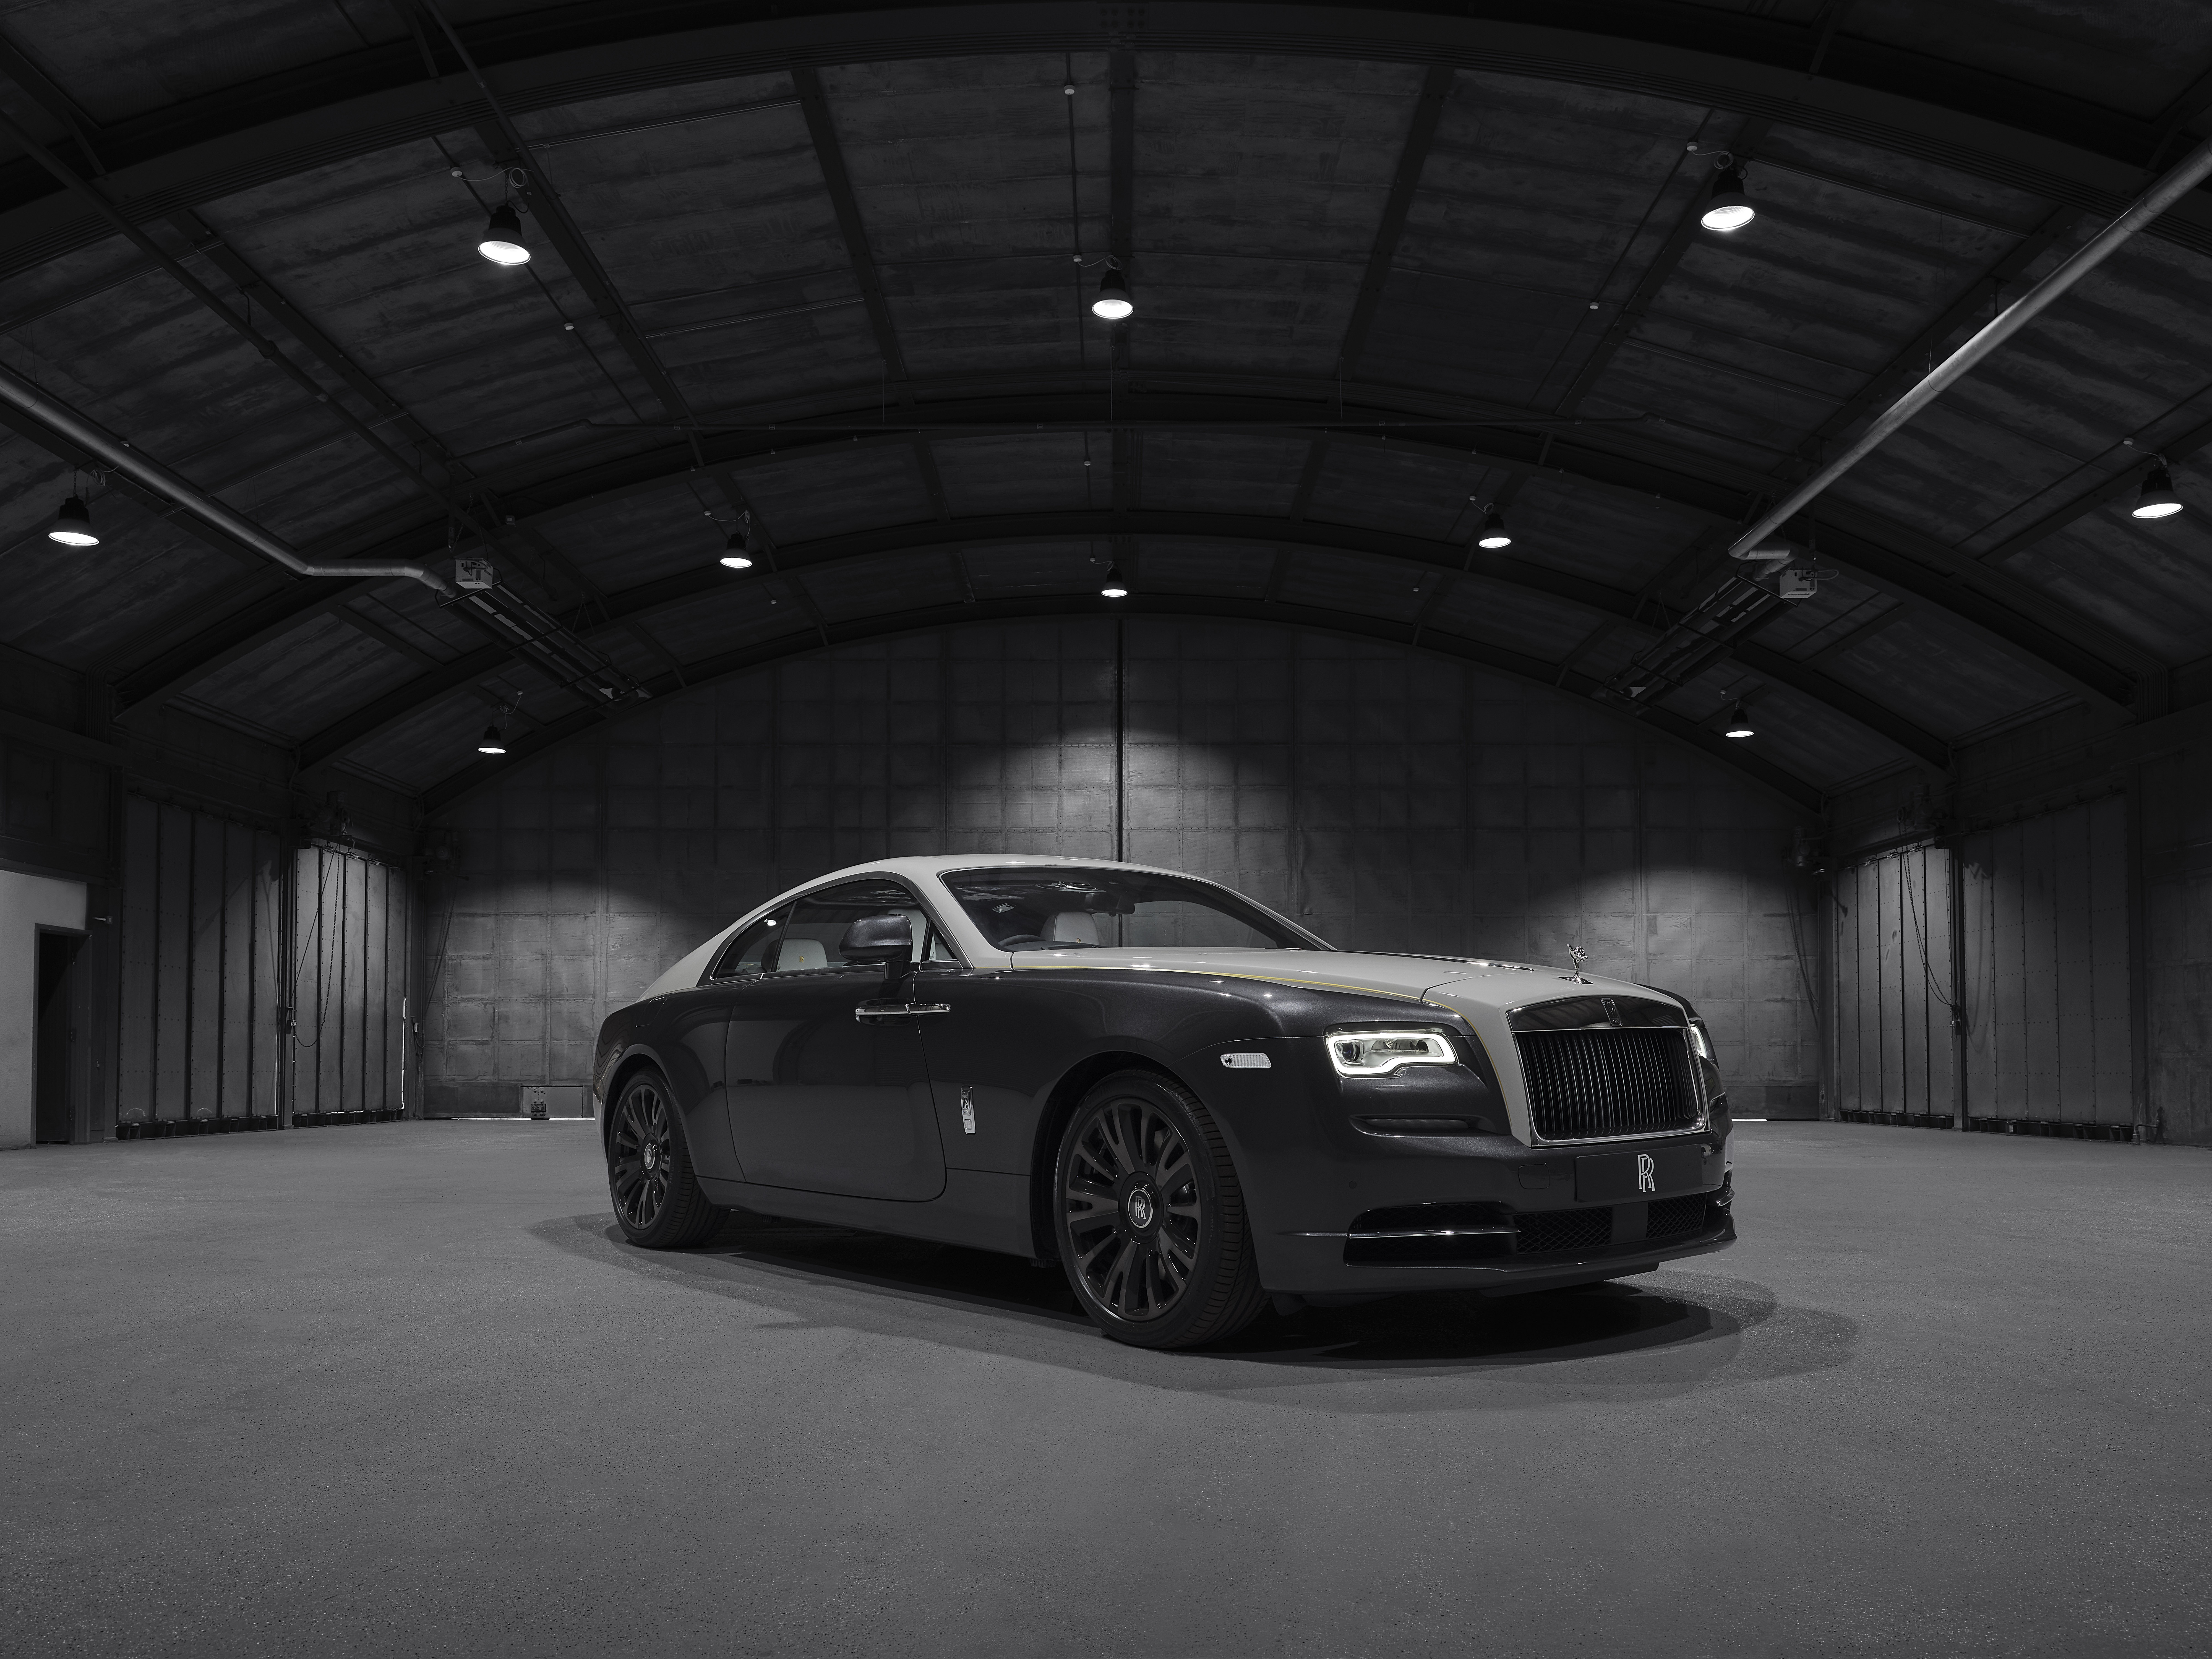 Rolls-Royce to Unveil Wraith Eagle VIII in Italy